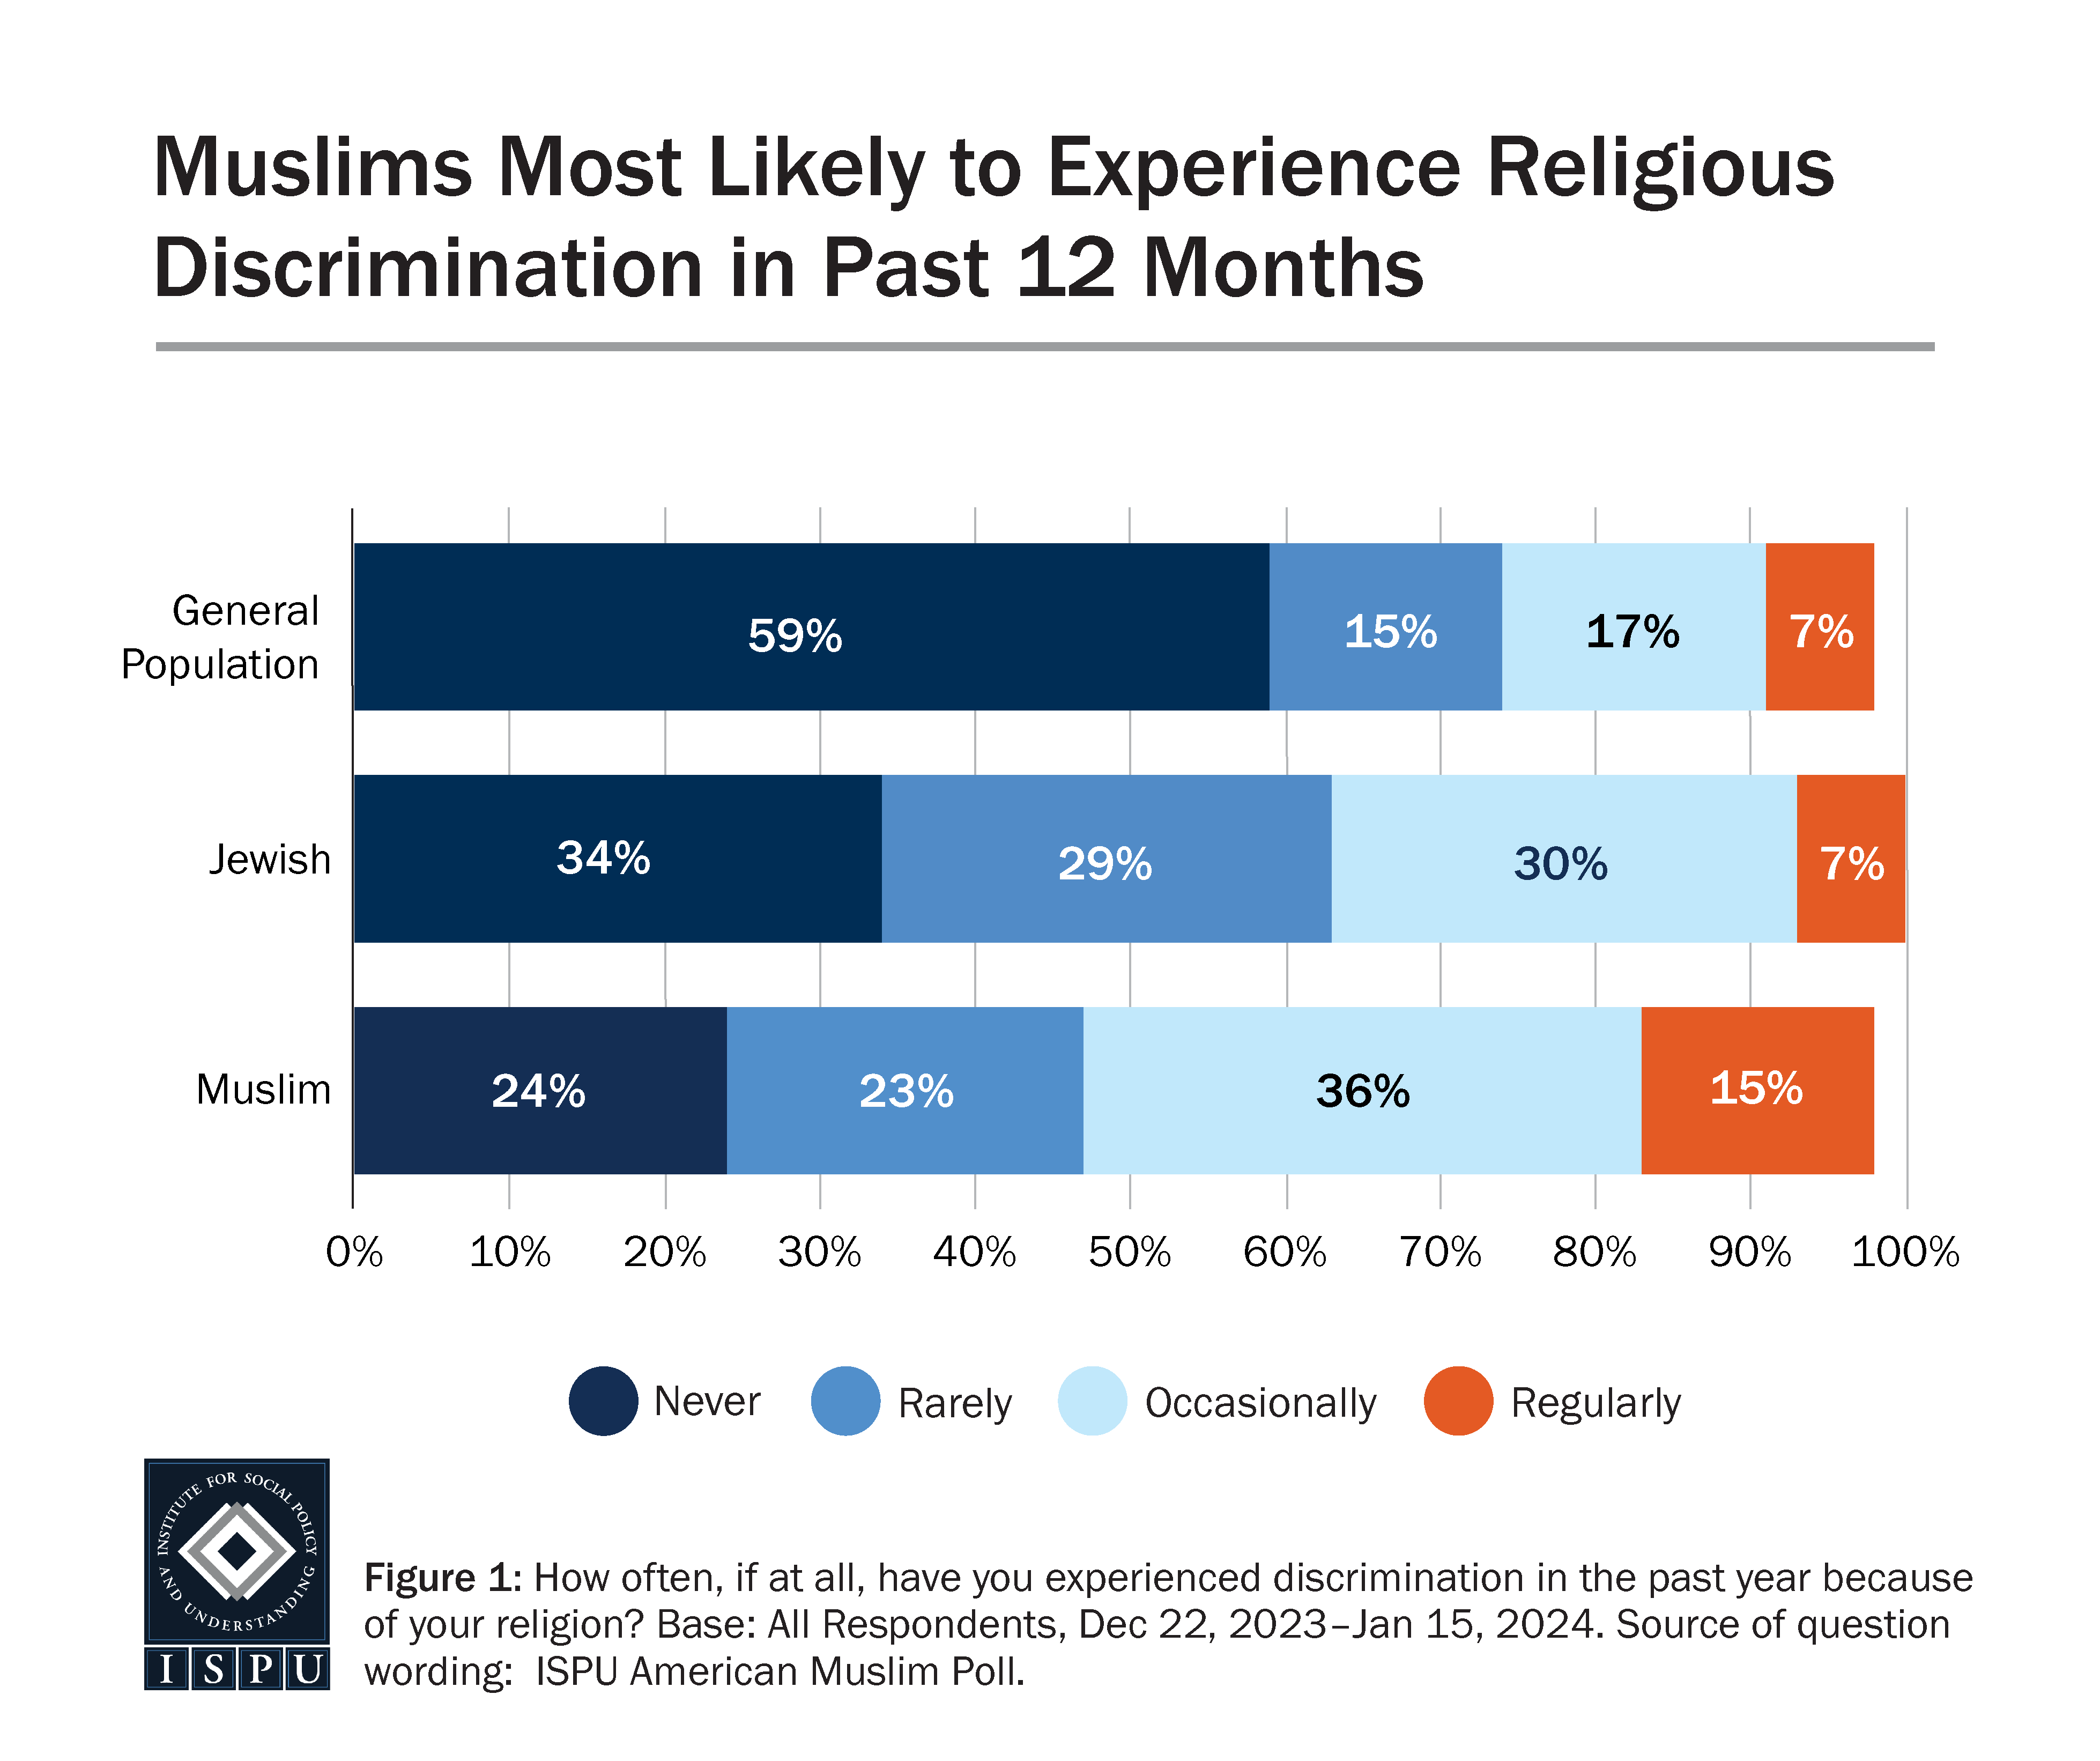 A bar graph showing the frequency of religious discrimination experienced by the general population, Jews, and Muslims.